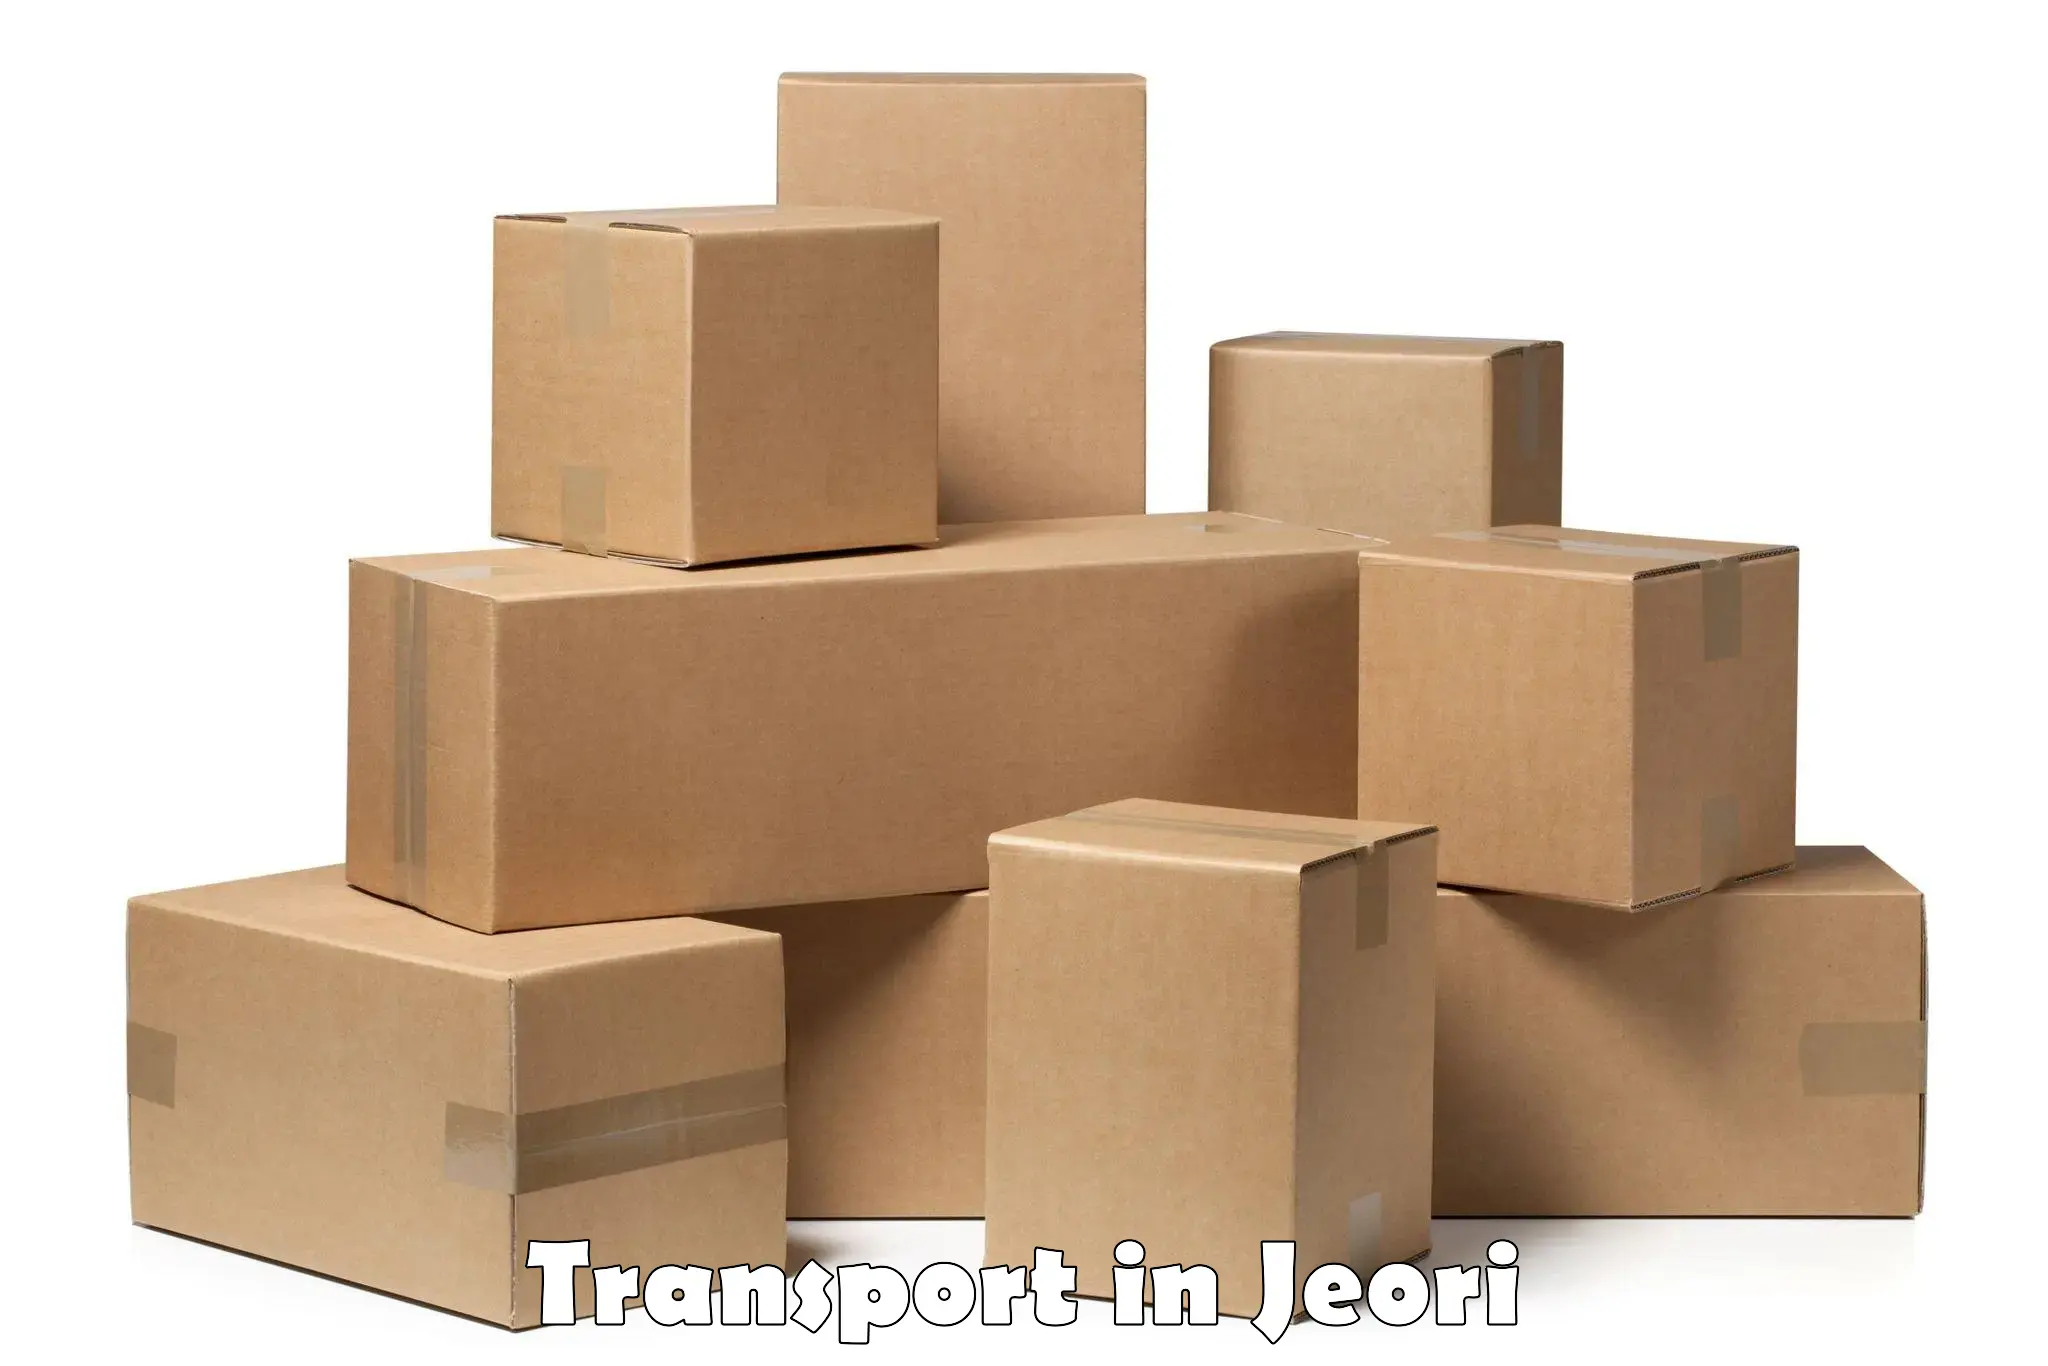 Inland transportation services in Jeori